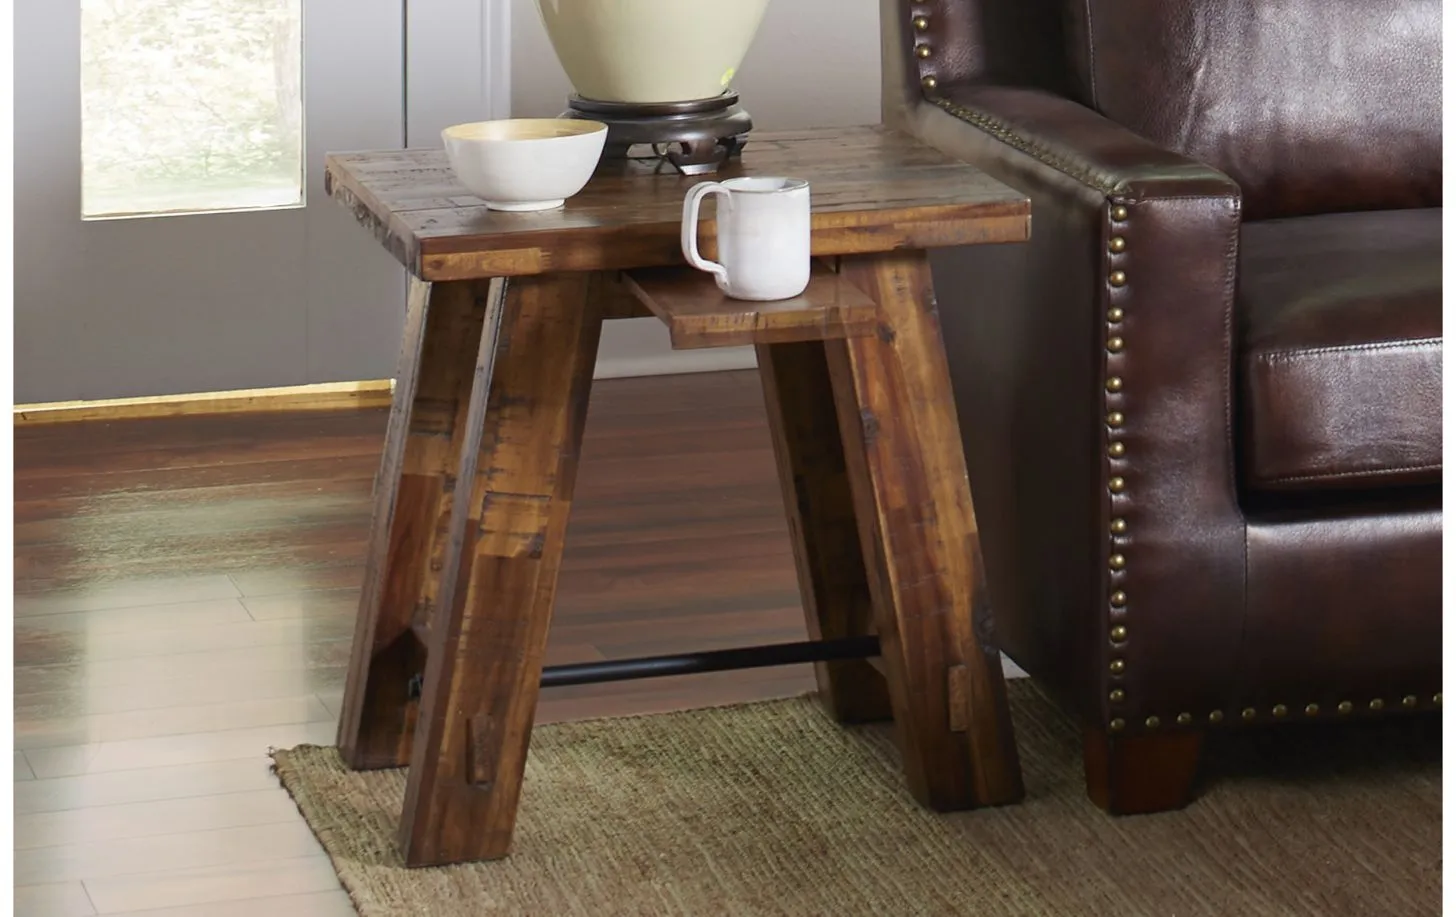 Jofran Cannon Valley Rectangular End Table in Distressed Natural by Jofran